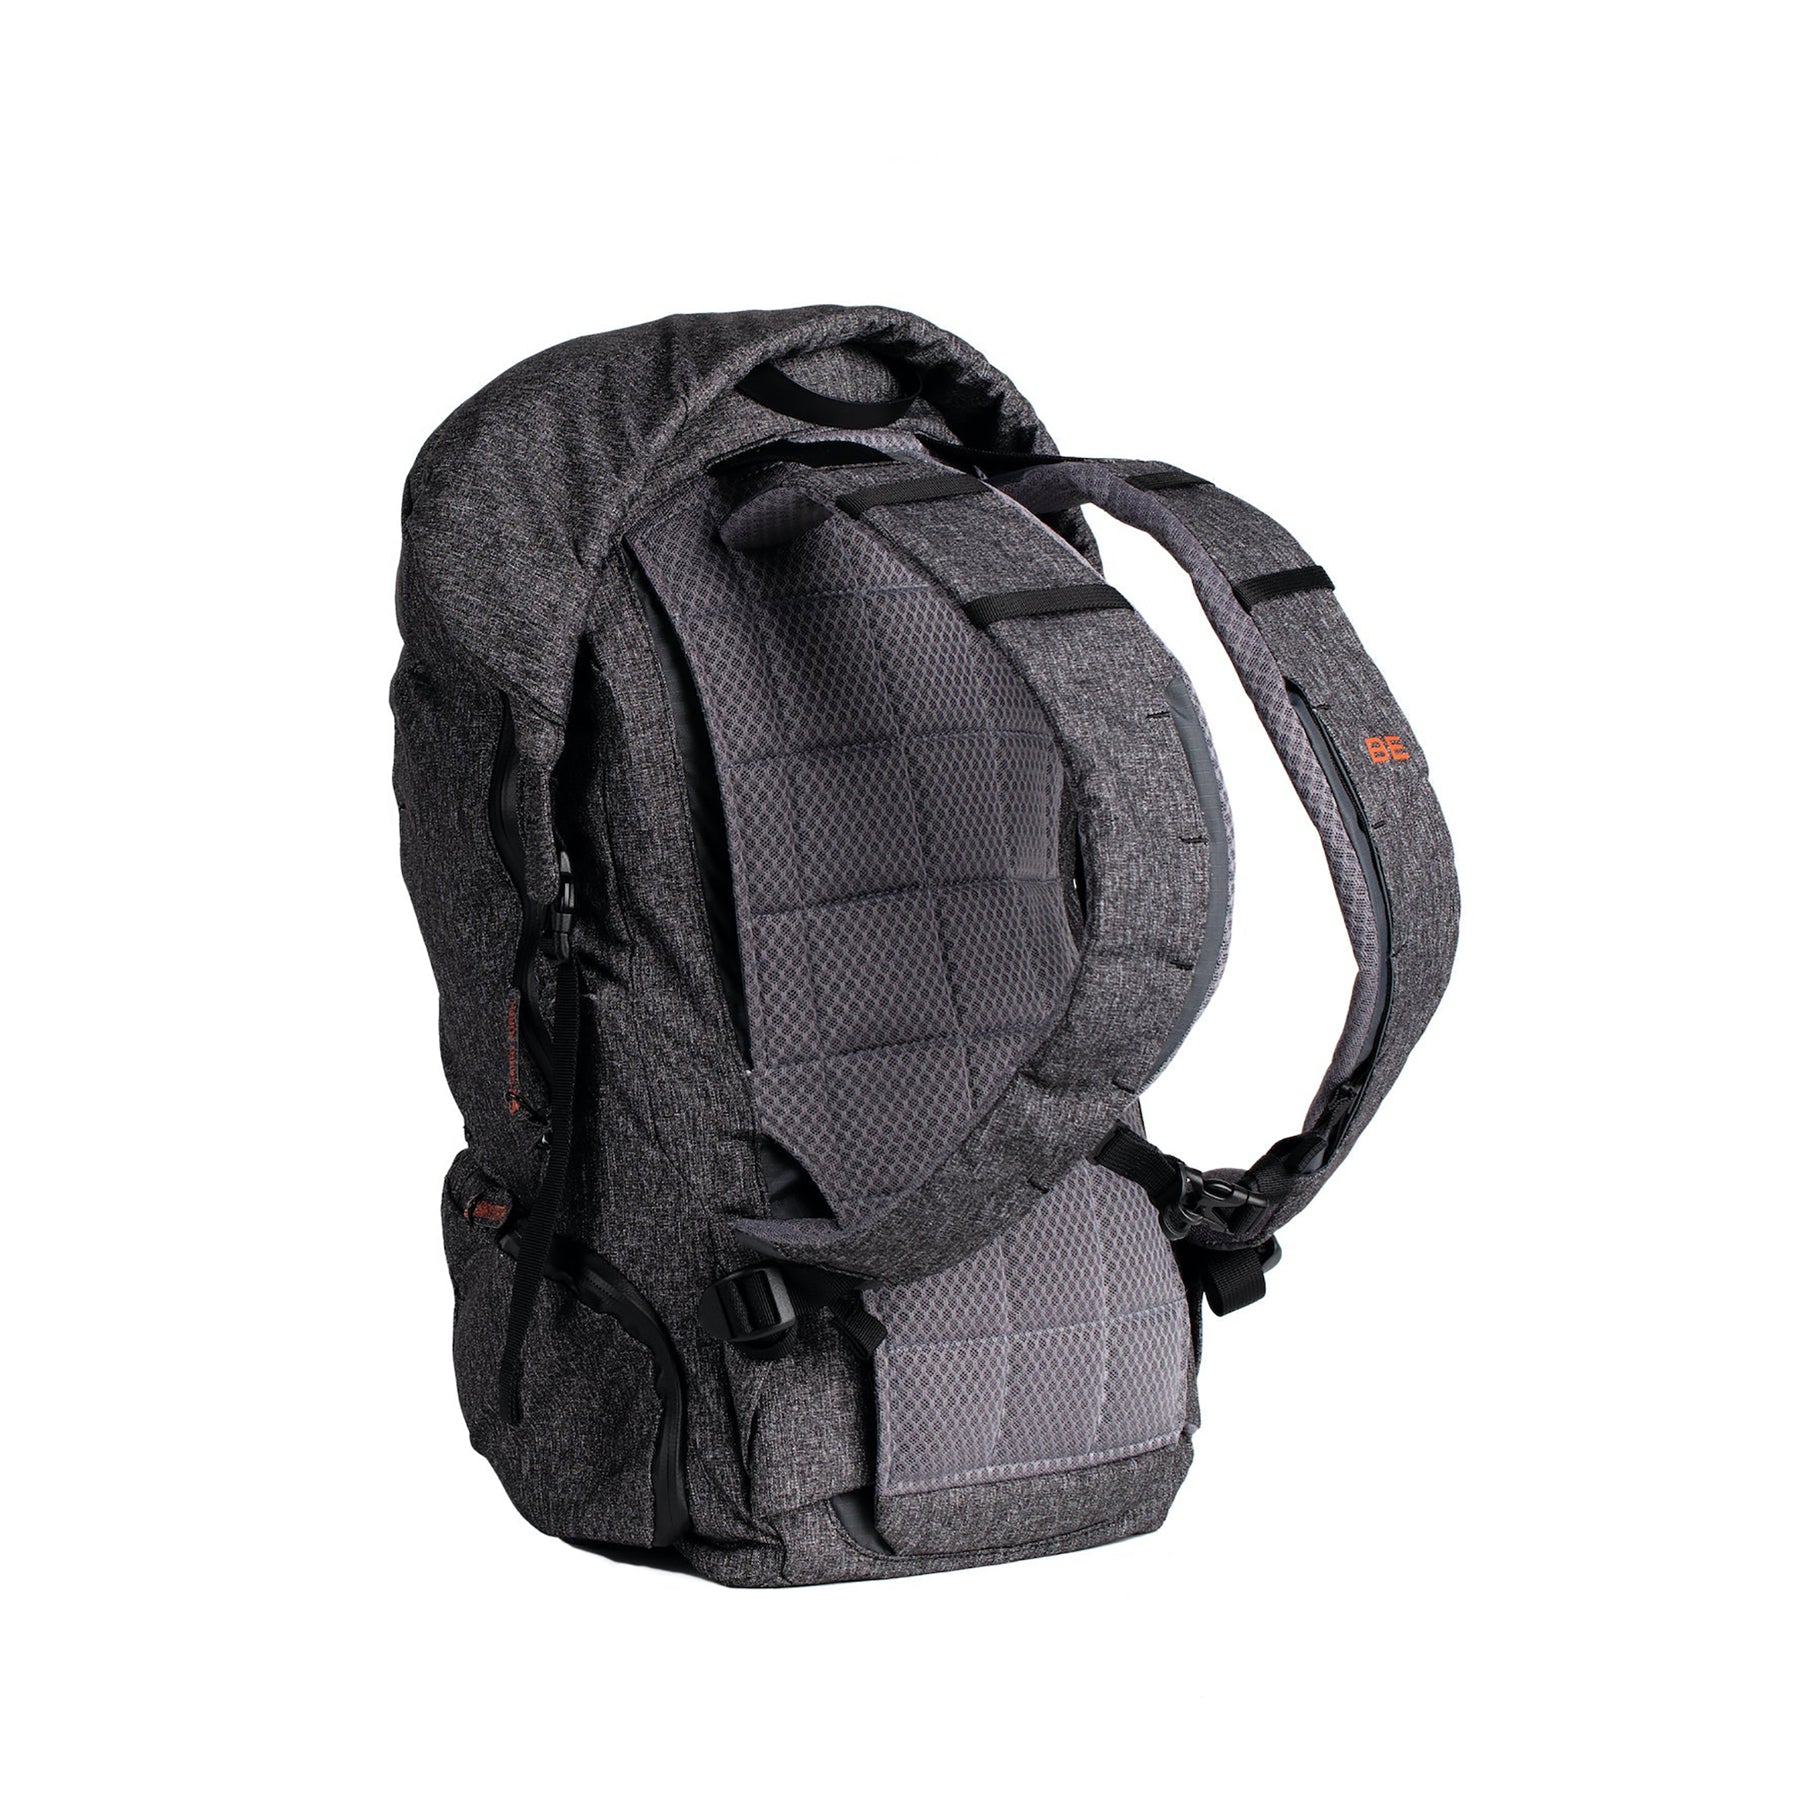 Back view of Midnight Black Tahquitz 2.0 pack with shoulder straps